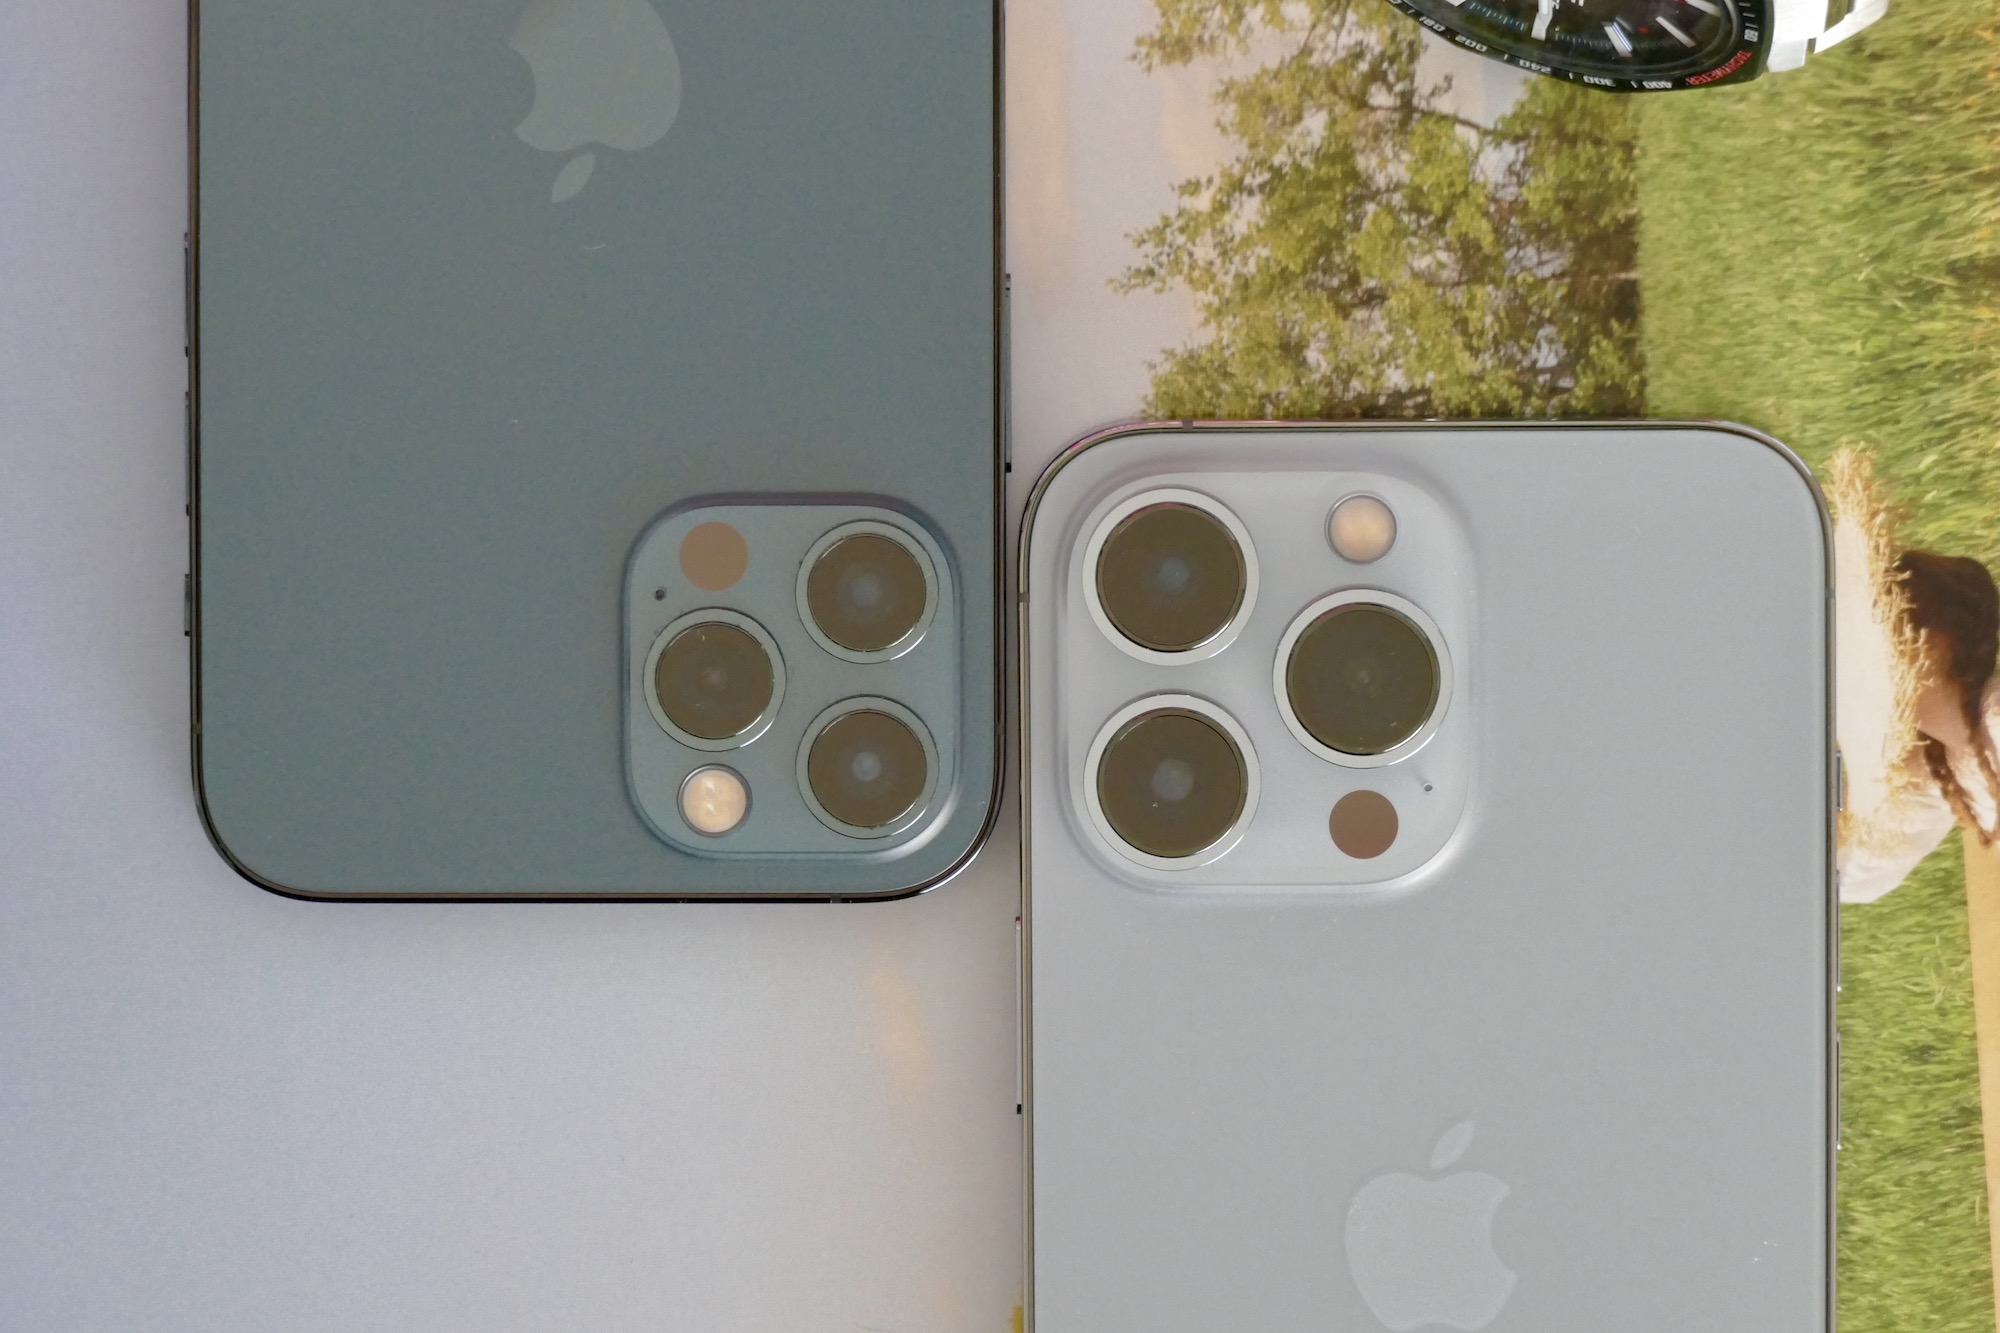 iPhone 12 Pro vs iPhone 12 Pro Max: Which Takes Better Photos?